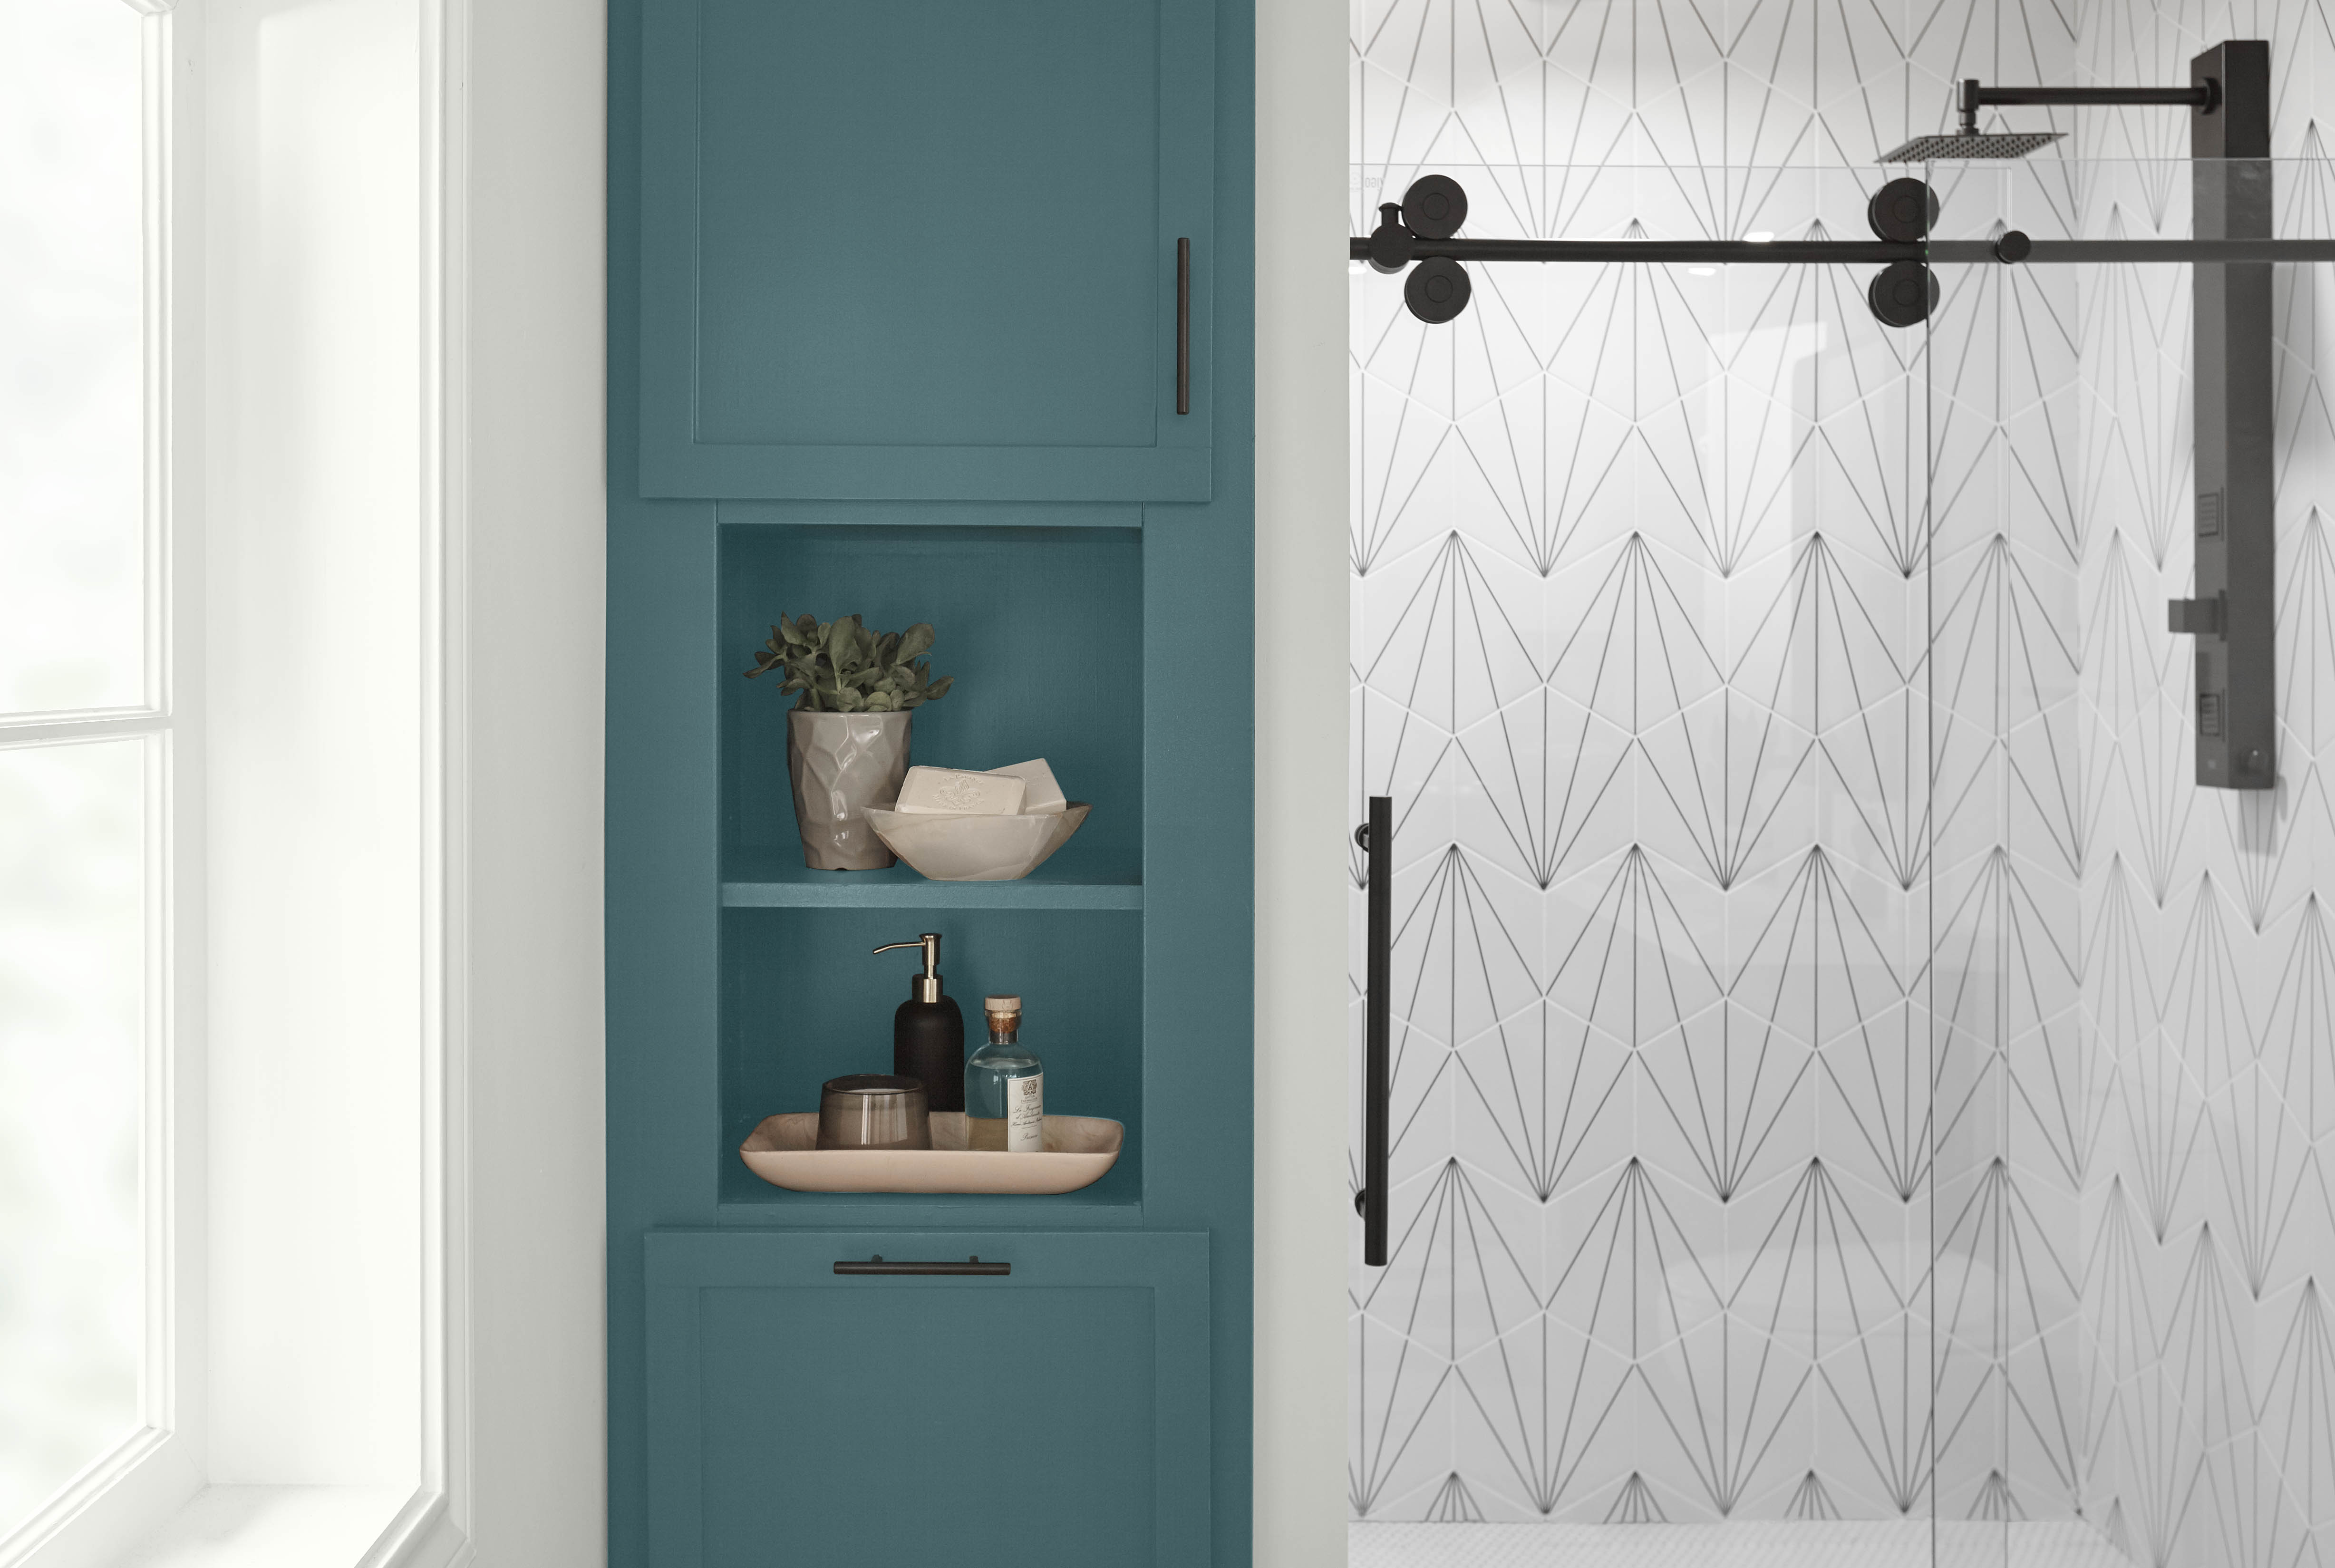 A modern bathroom with cabinetry in the colour Sophisticated Teal